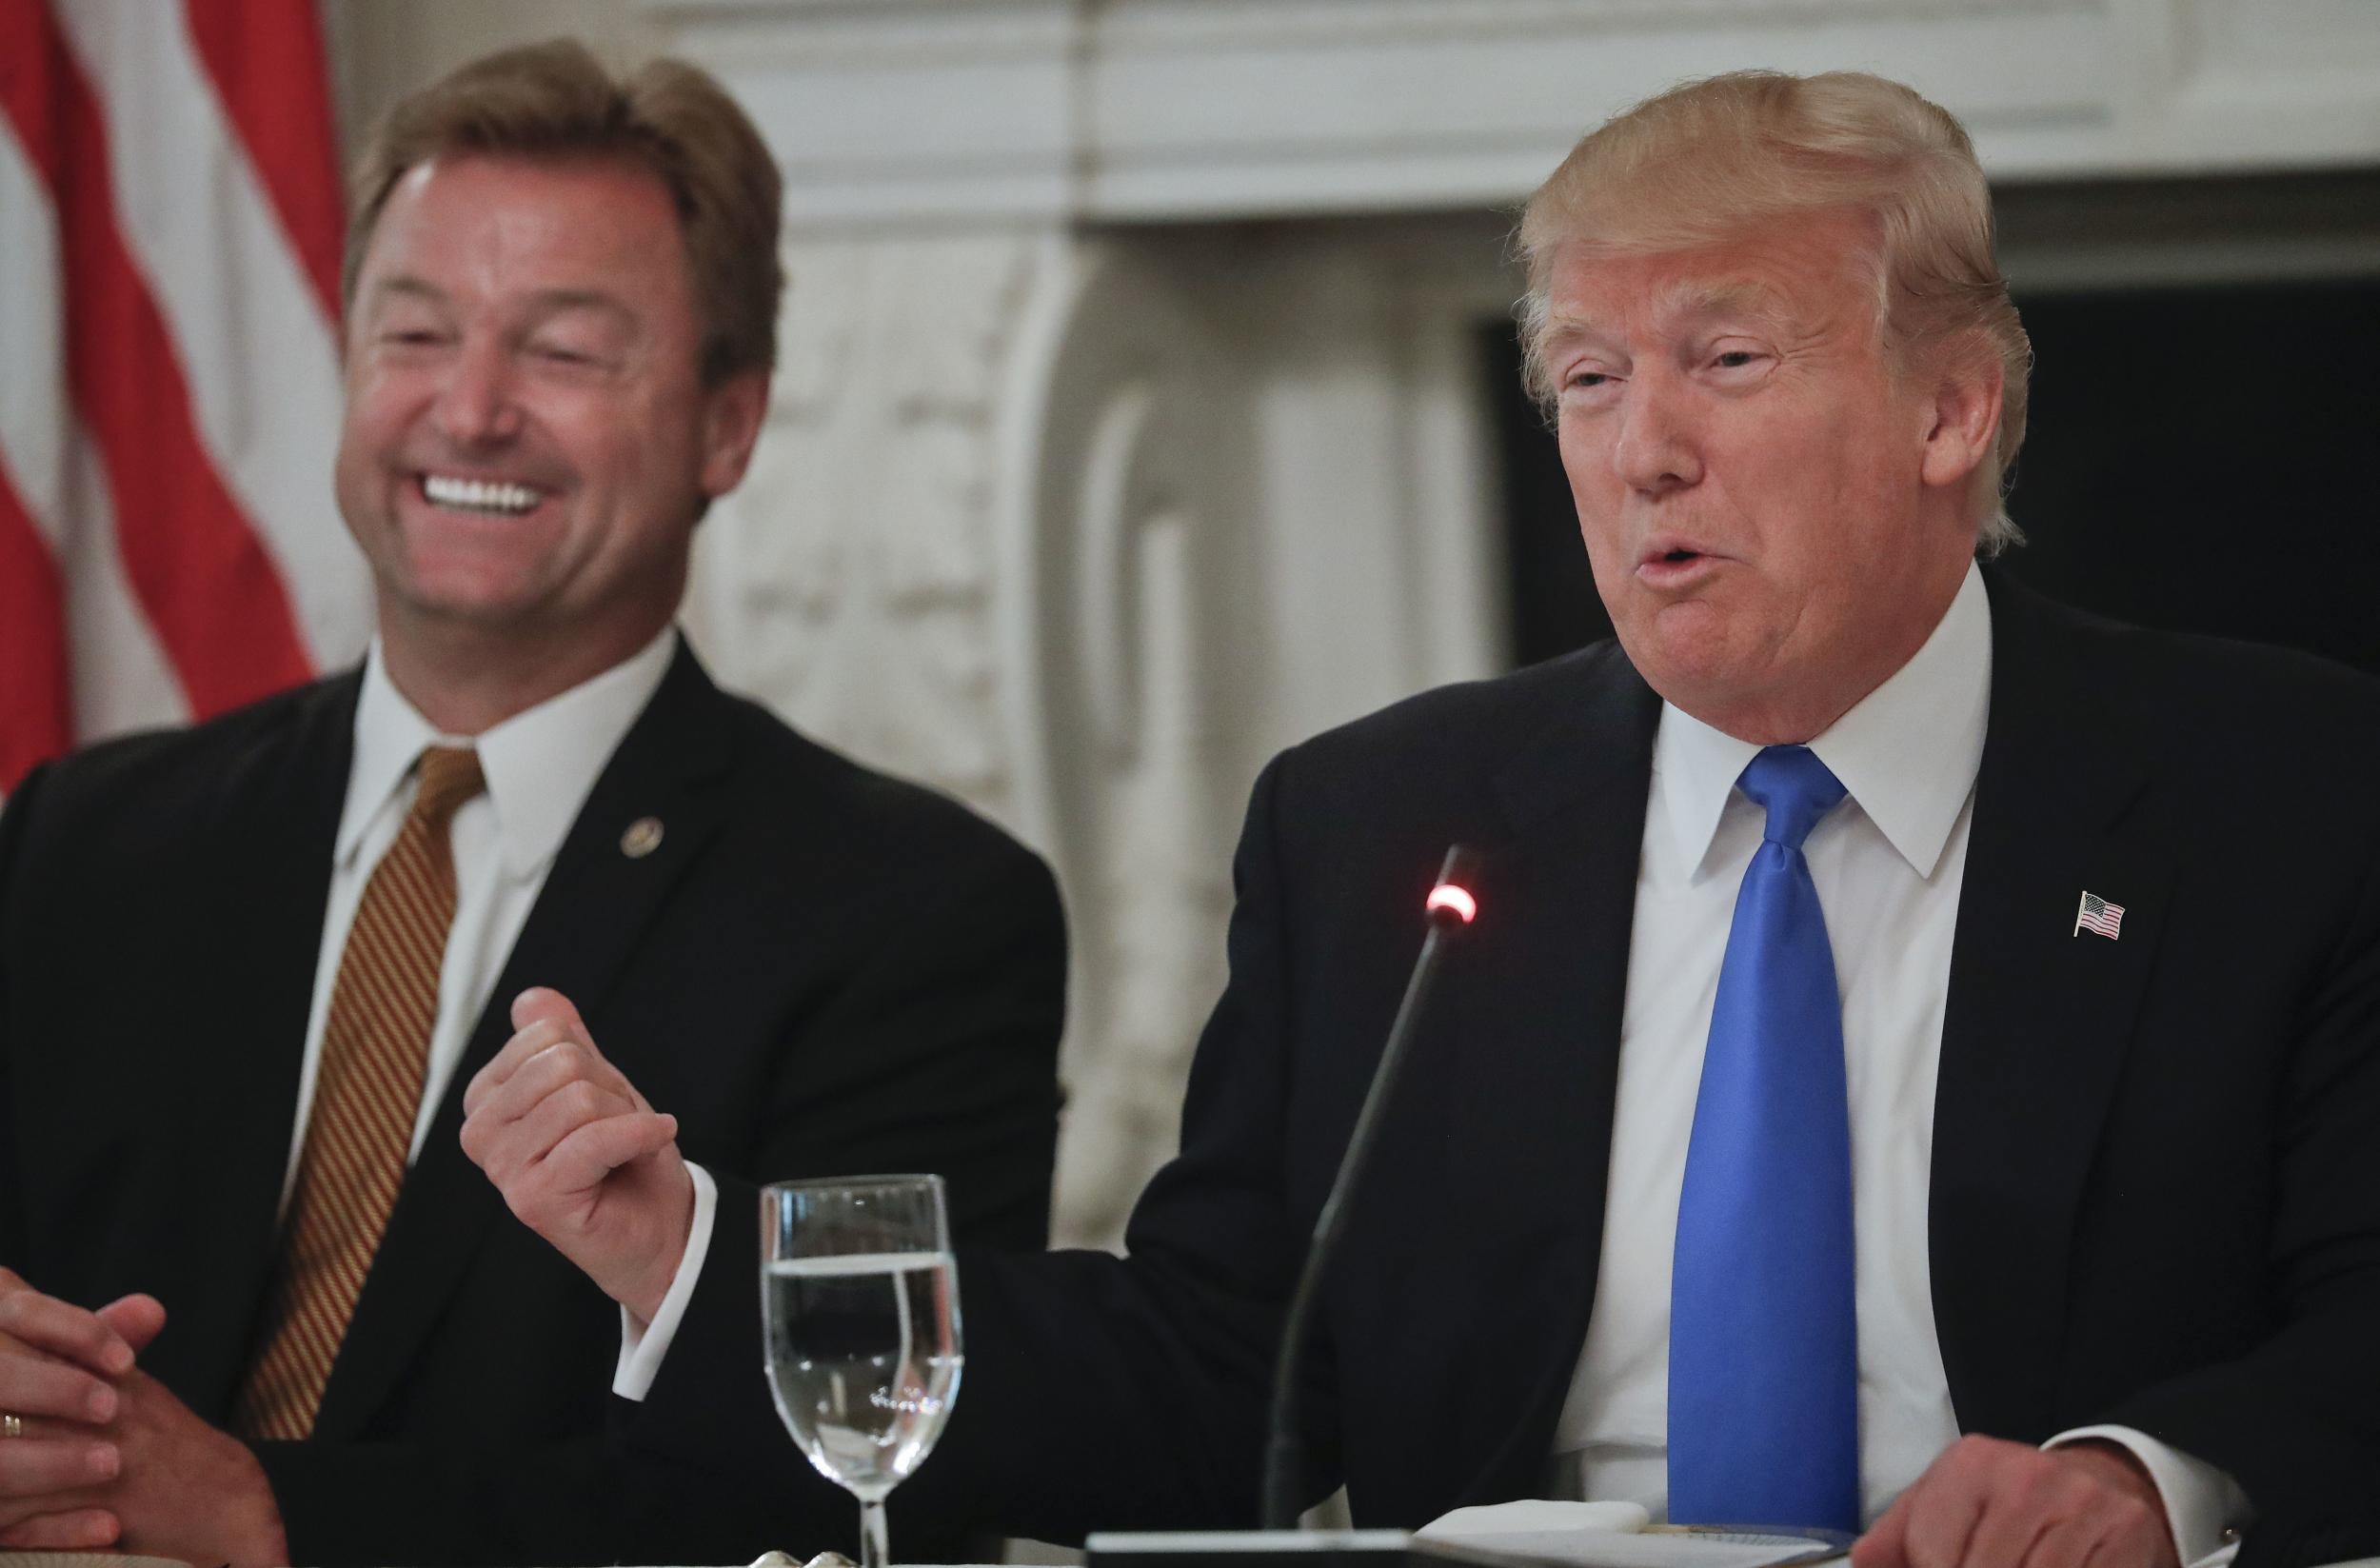 President Donald Trump gestures towards Senator Dean Heller while speaking during a luncheon